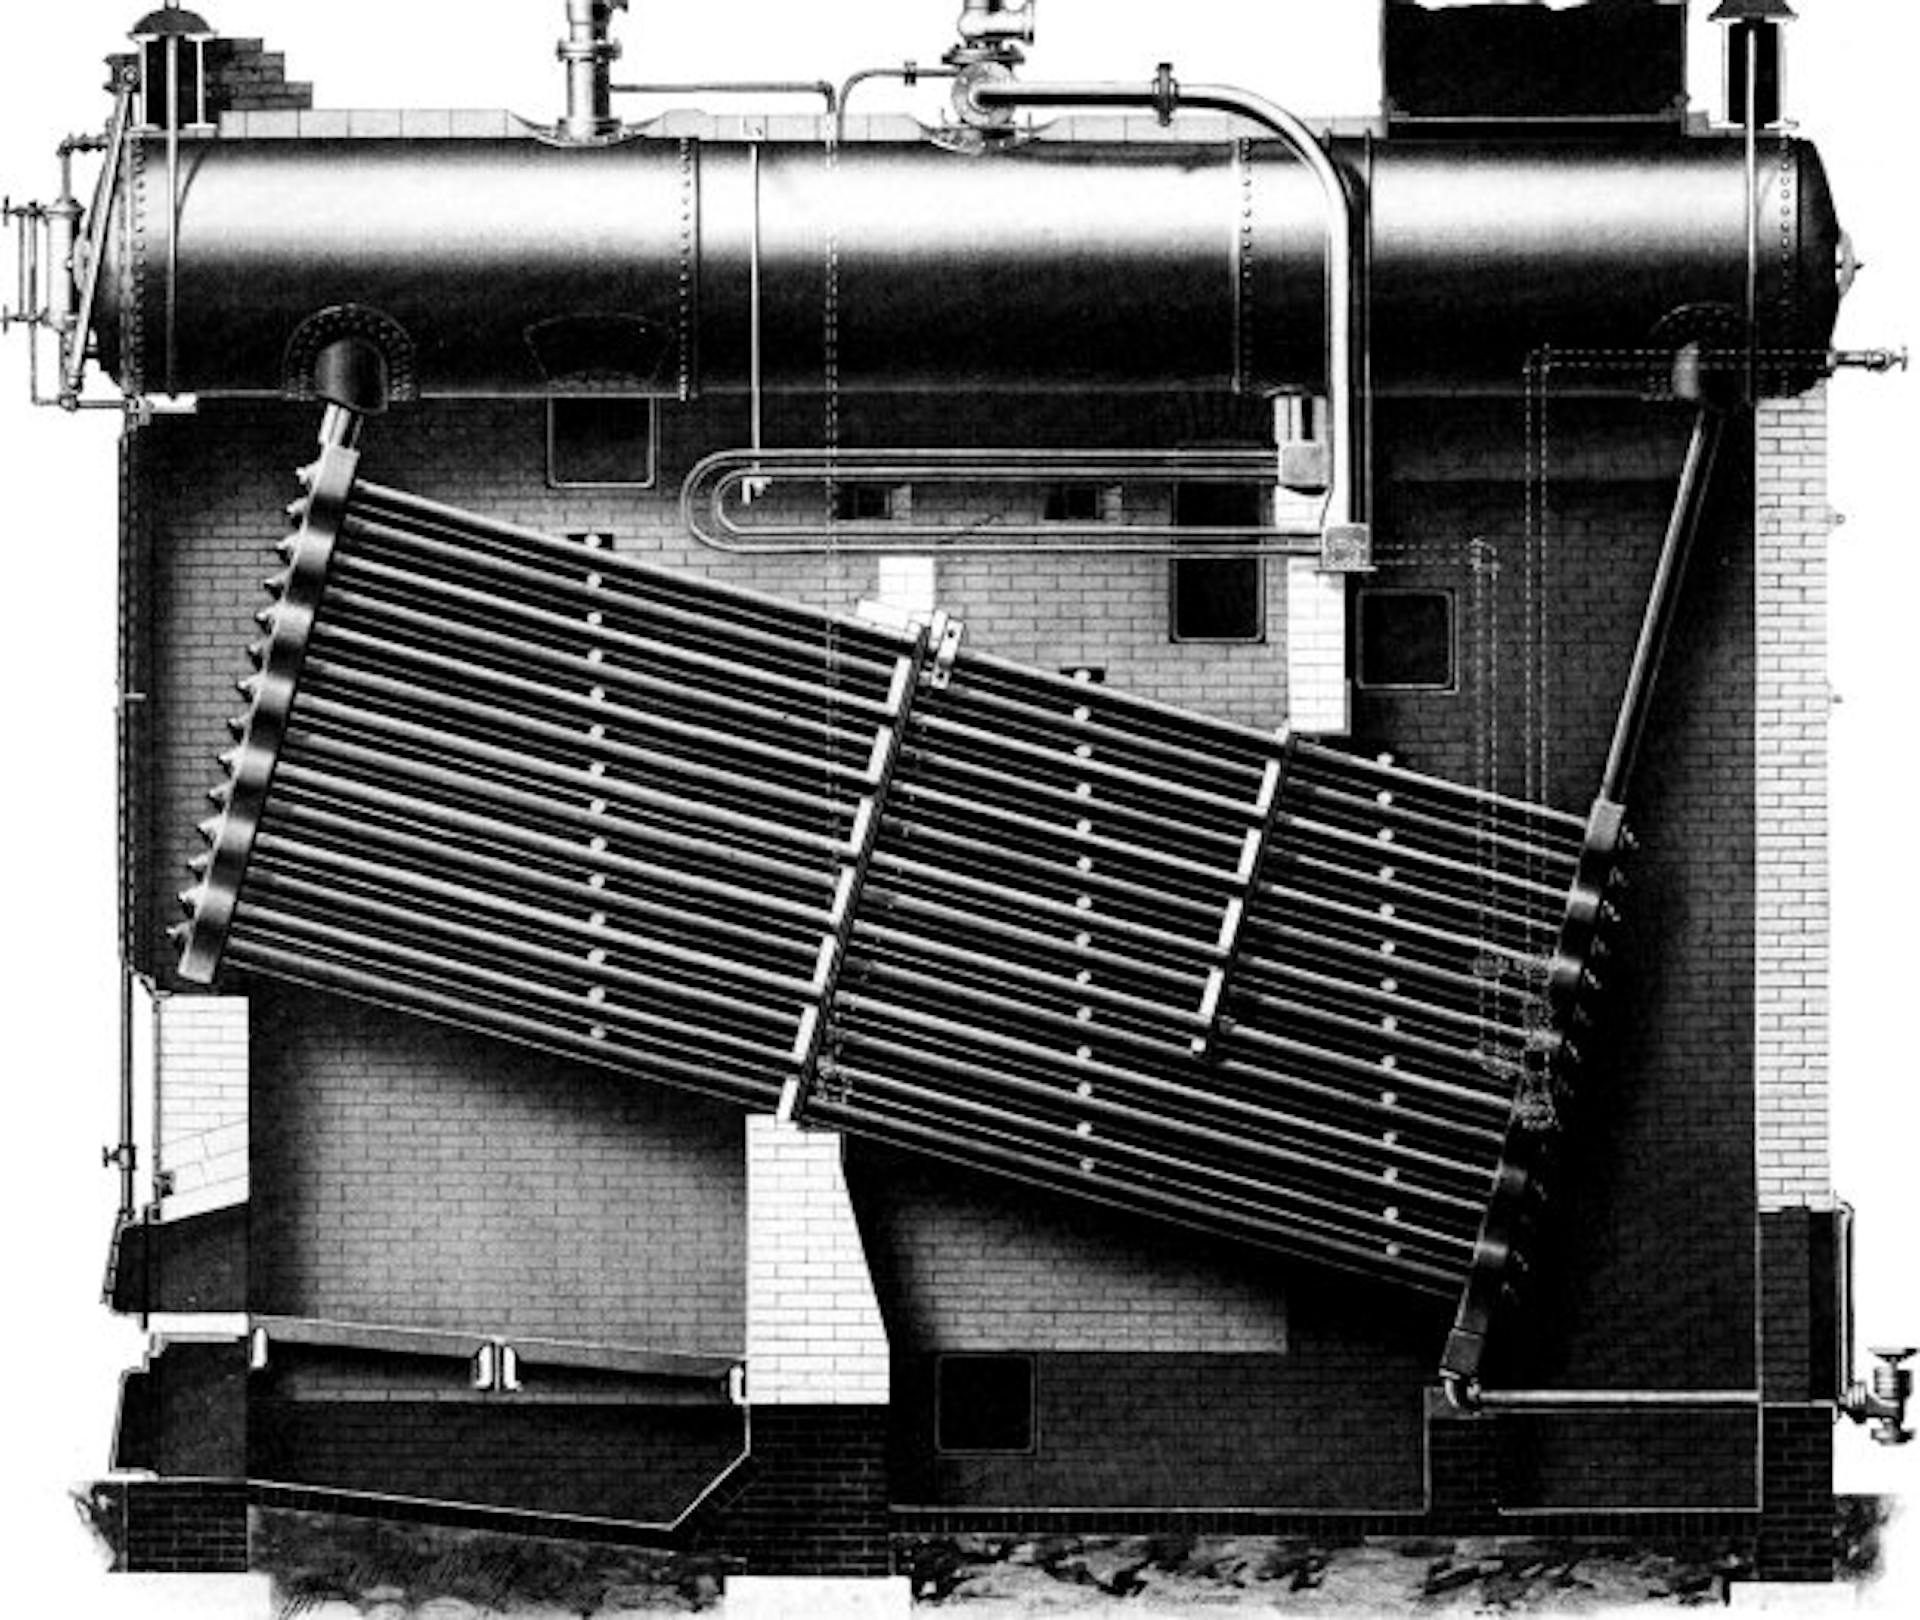 Wrought-steel Inclined Header Longitudinal Drum Babcock & Wilcox Boiler, Equipped with Babcock & Wilcox Superheater